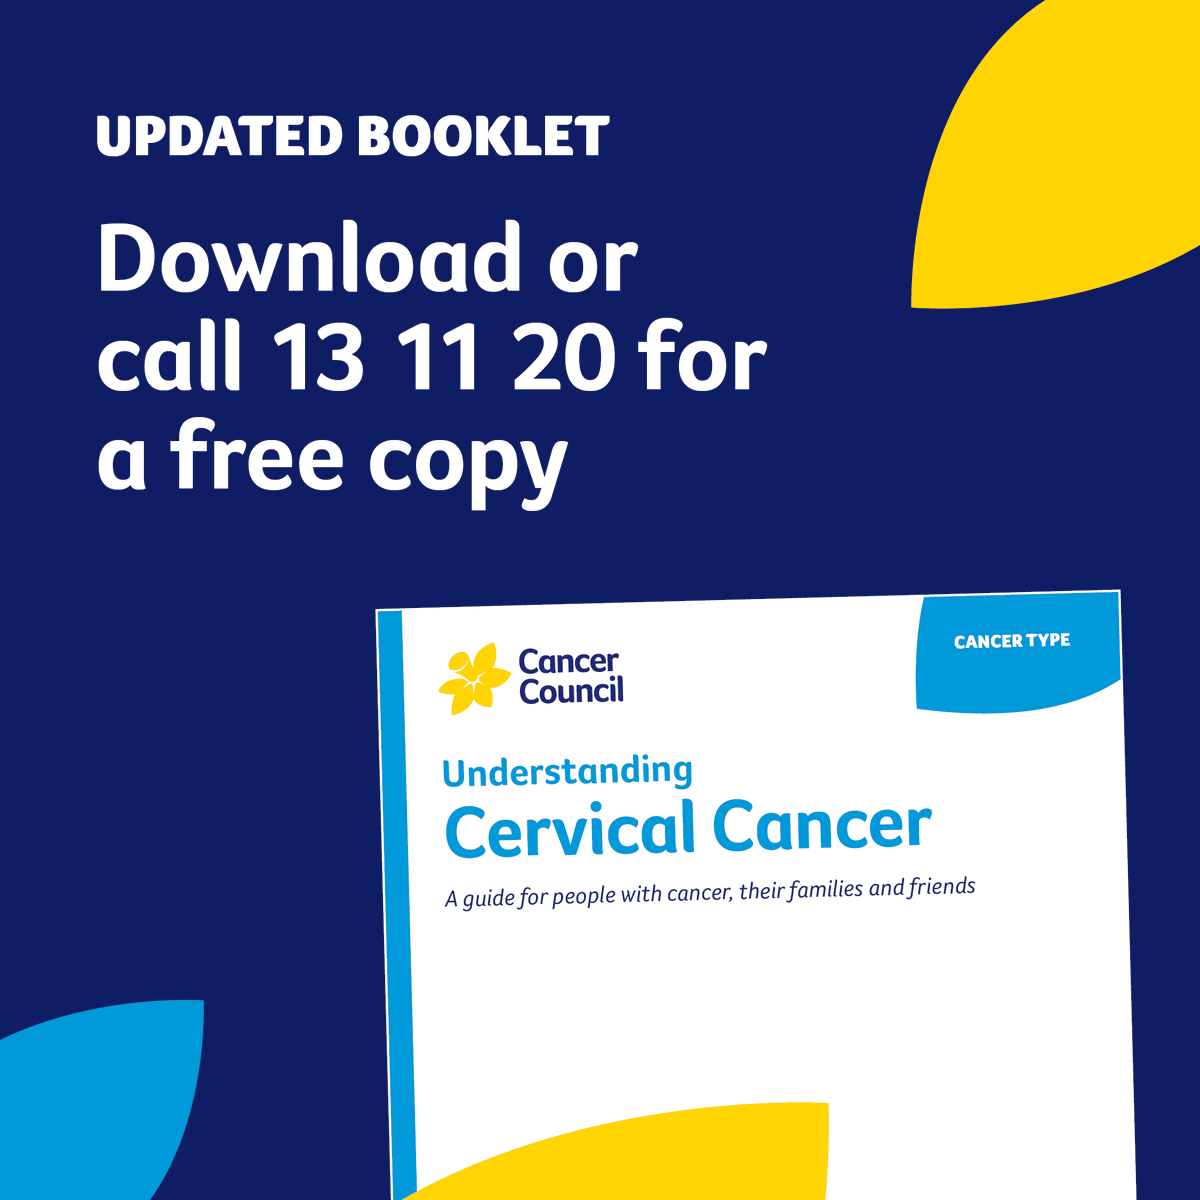 Cervical cancer may occur at any age, but over half of cases happen between the ages of 30-49 years. Download our free booklet or call us on 13 11 20. ow.ly/ruH350QFWPr With thanks to our expert reviewers @DaffodilCentre @COBLH @anne_mellon @DrIngerO @BususttilGemma